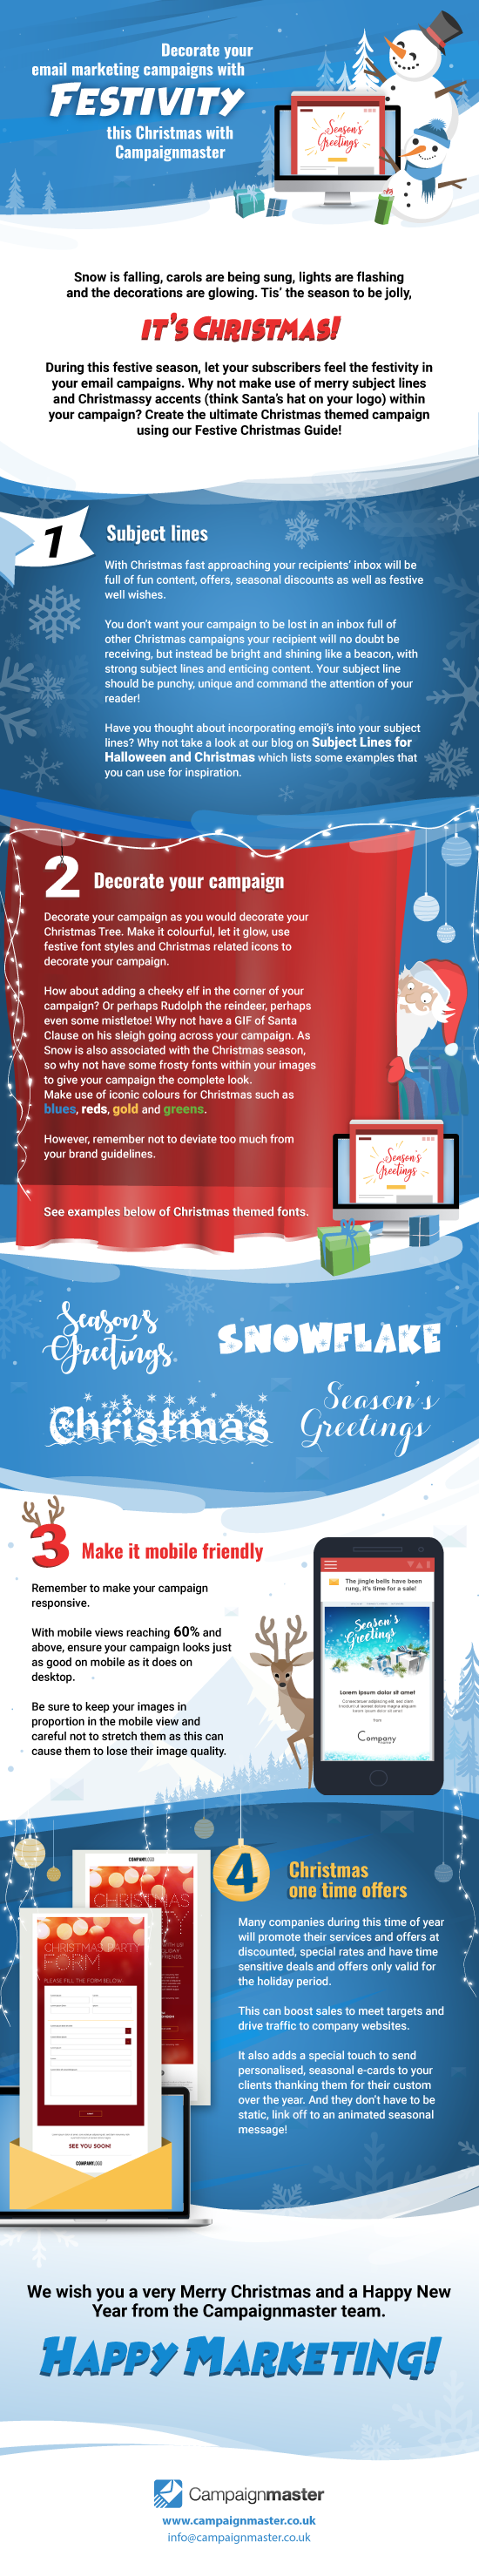 Christmas Email Marketing - Infographic